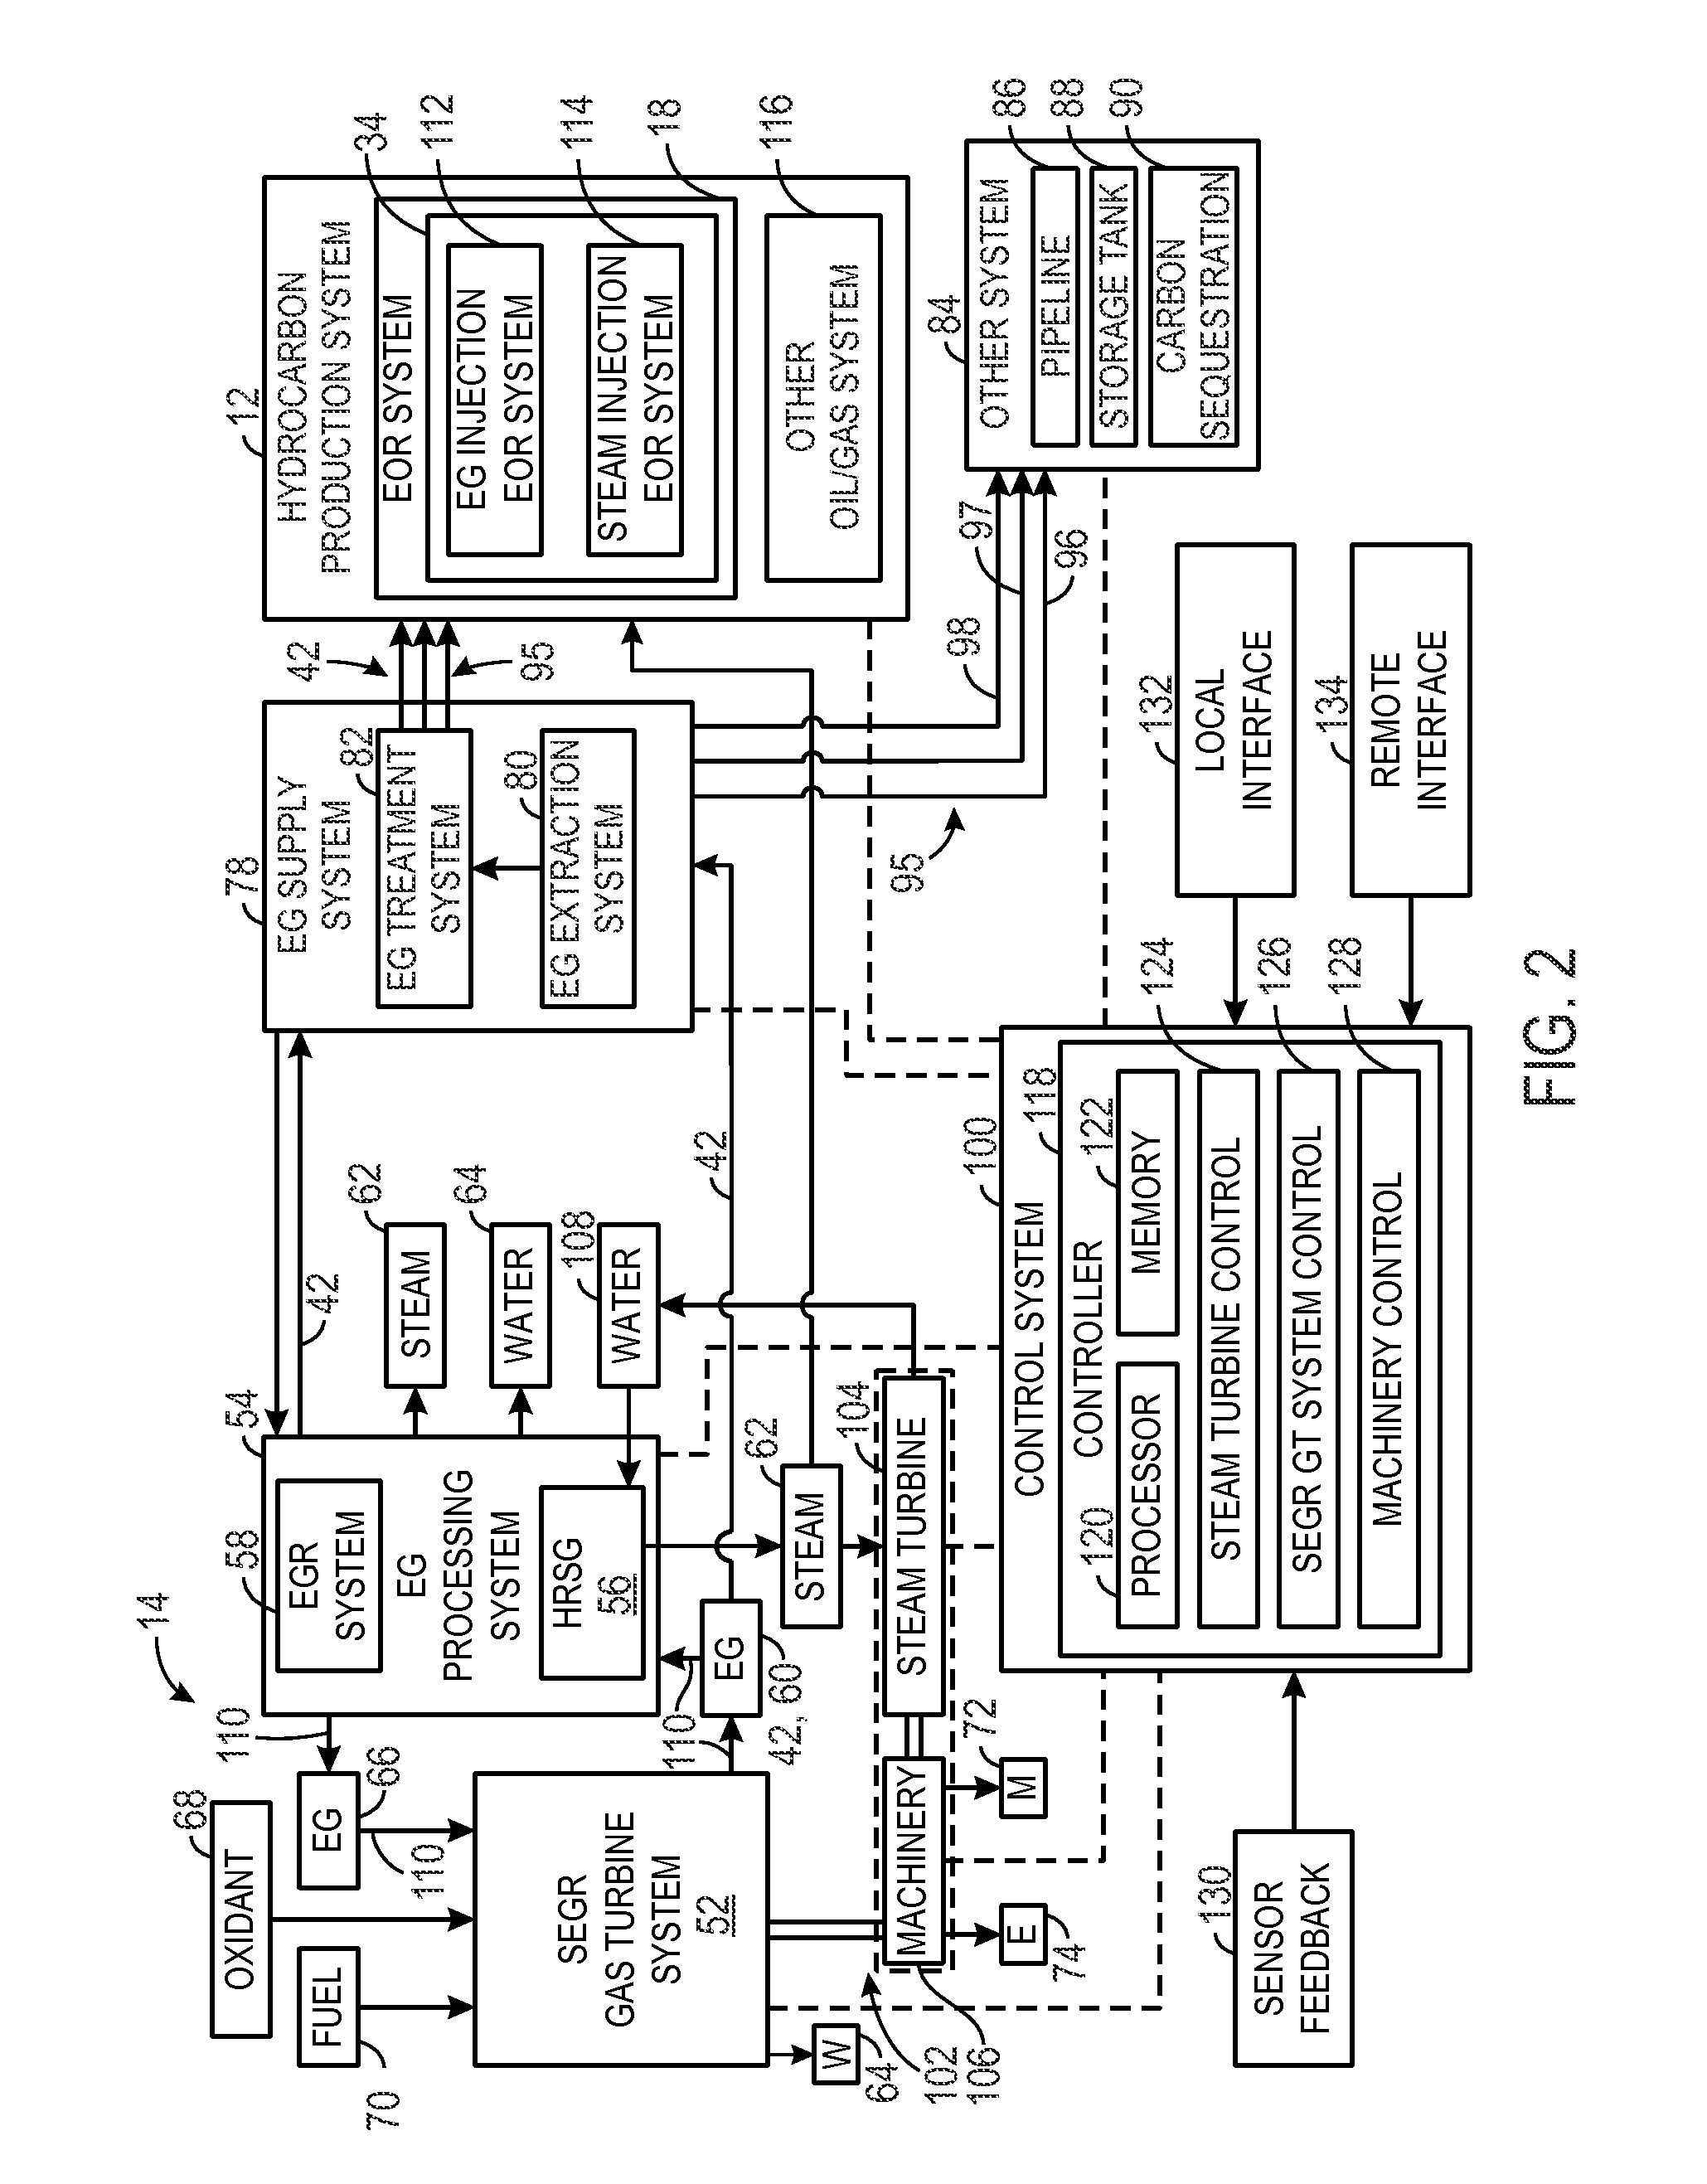 System and method for a turbine combustor